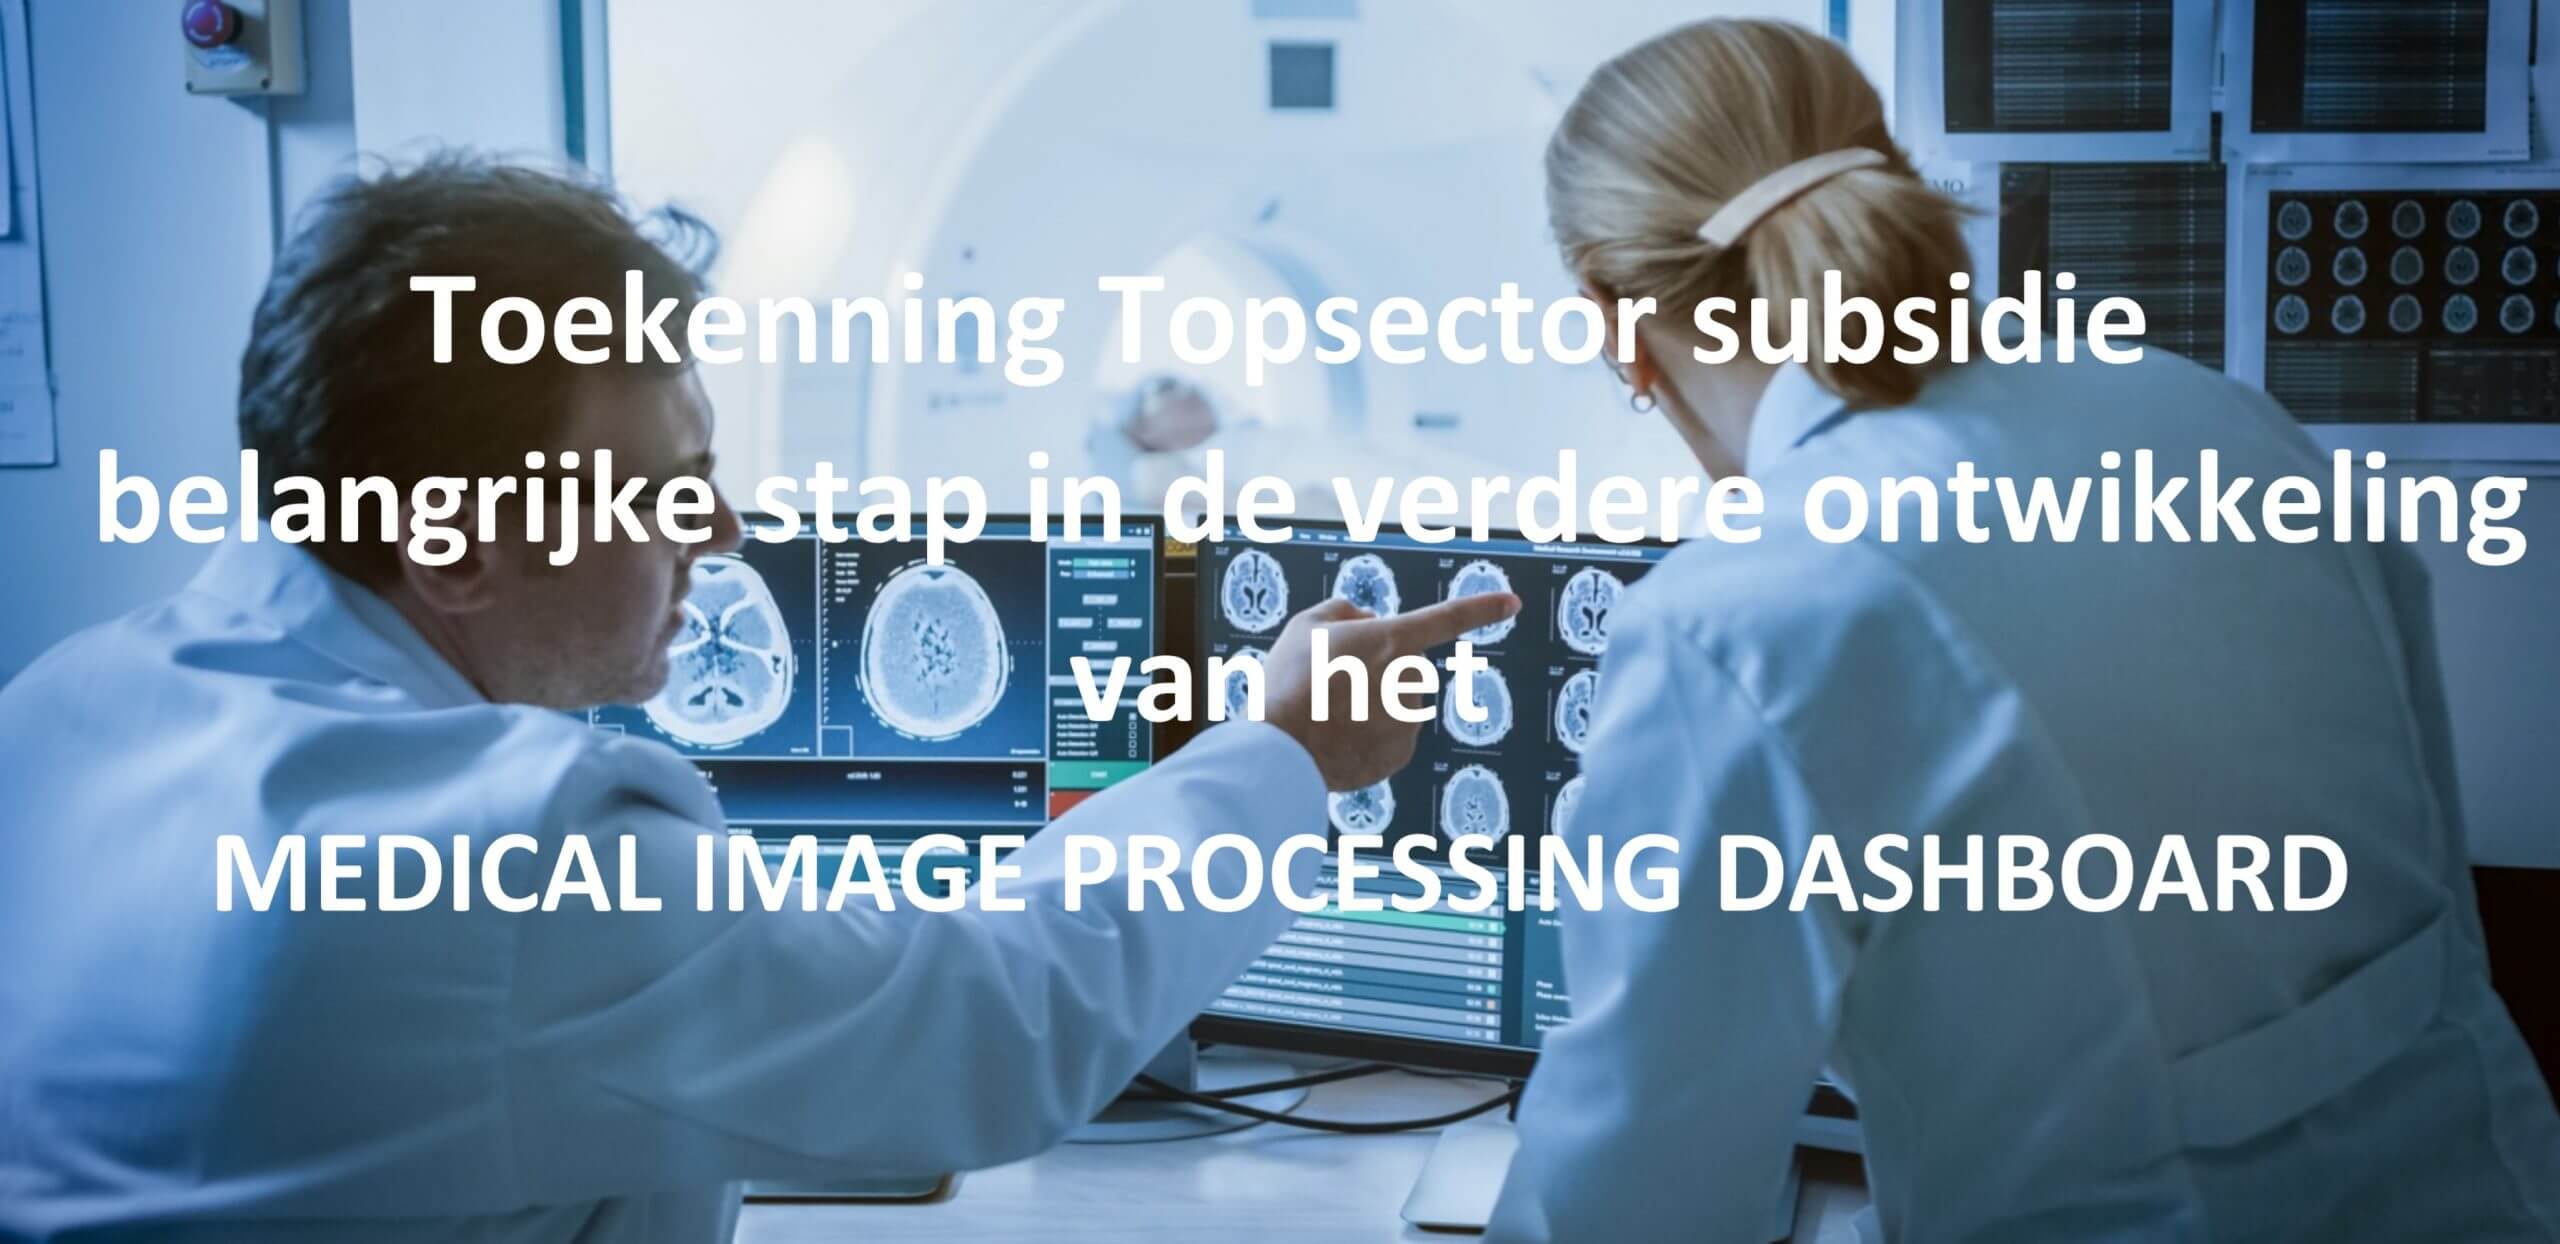 Topsector subsidie voor MEDICAL IMAGE PROCESSING DASHBOARD